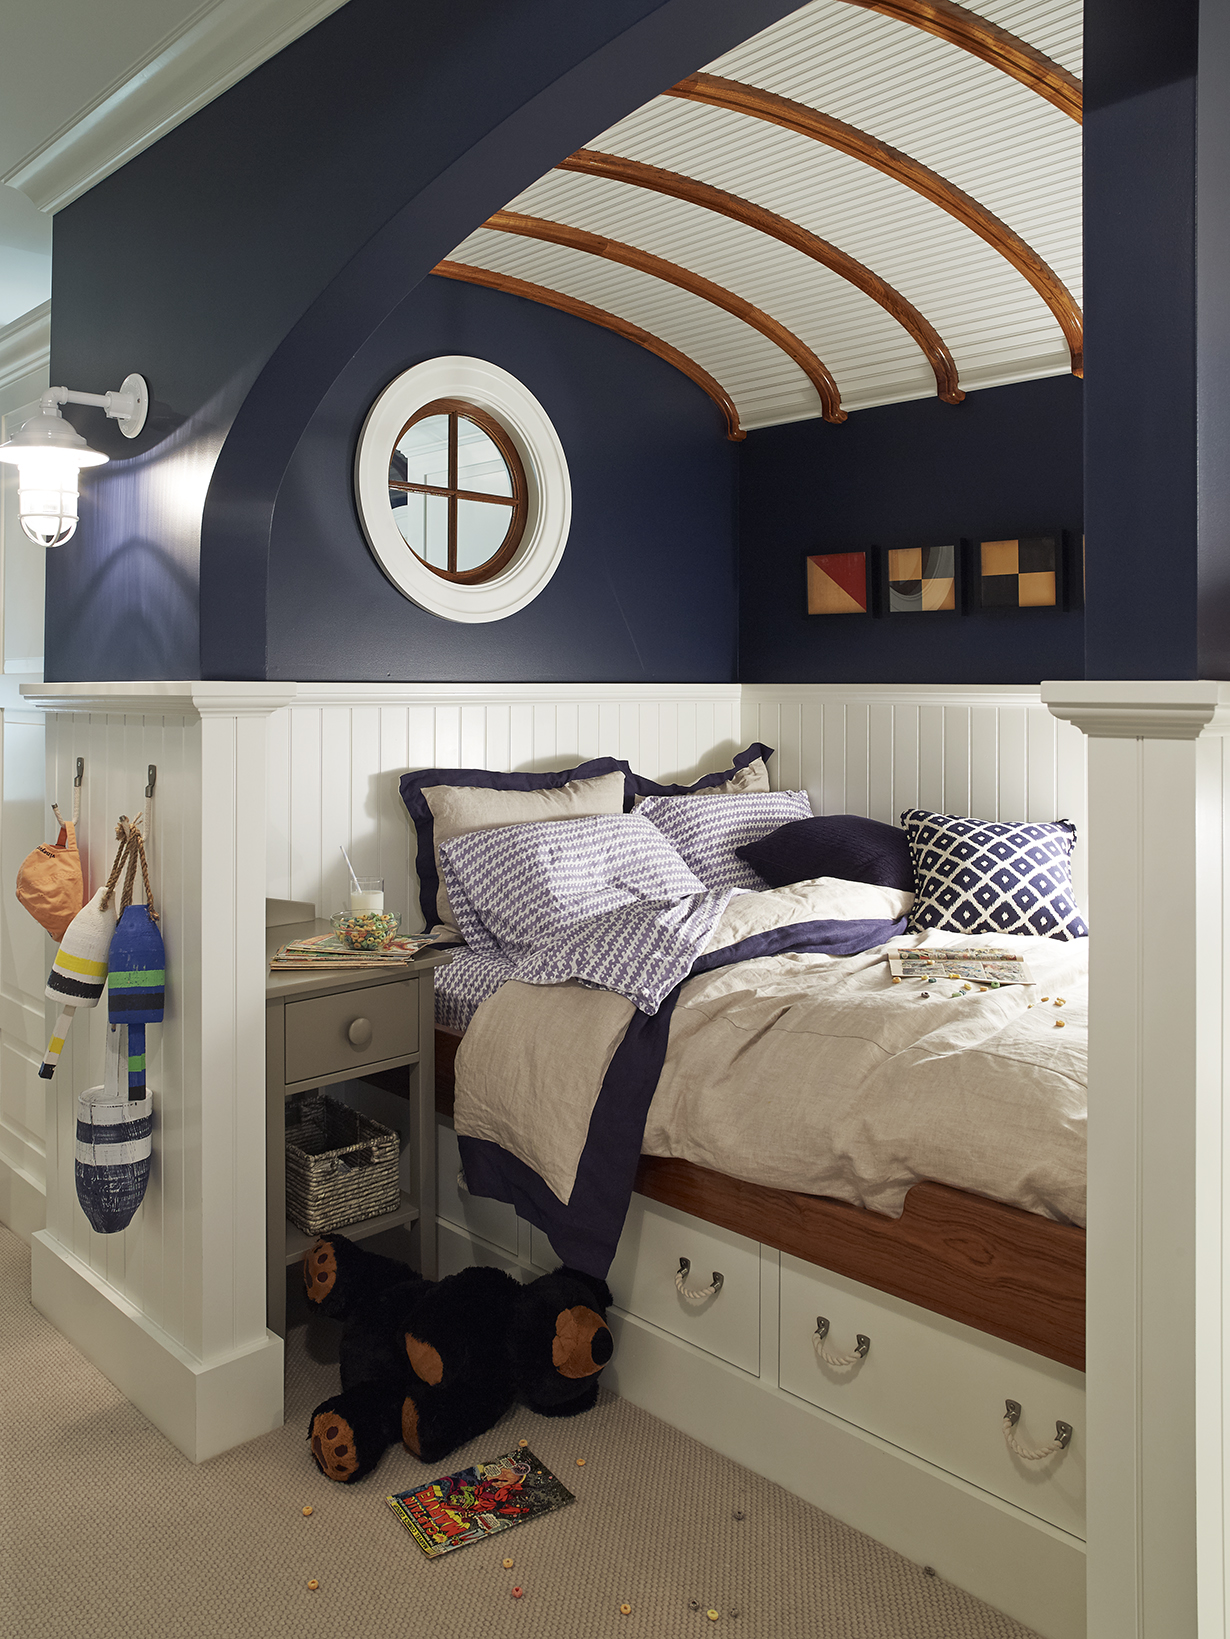 Nautical inspired room with navy blue and shiplap ceiling